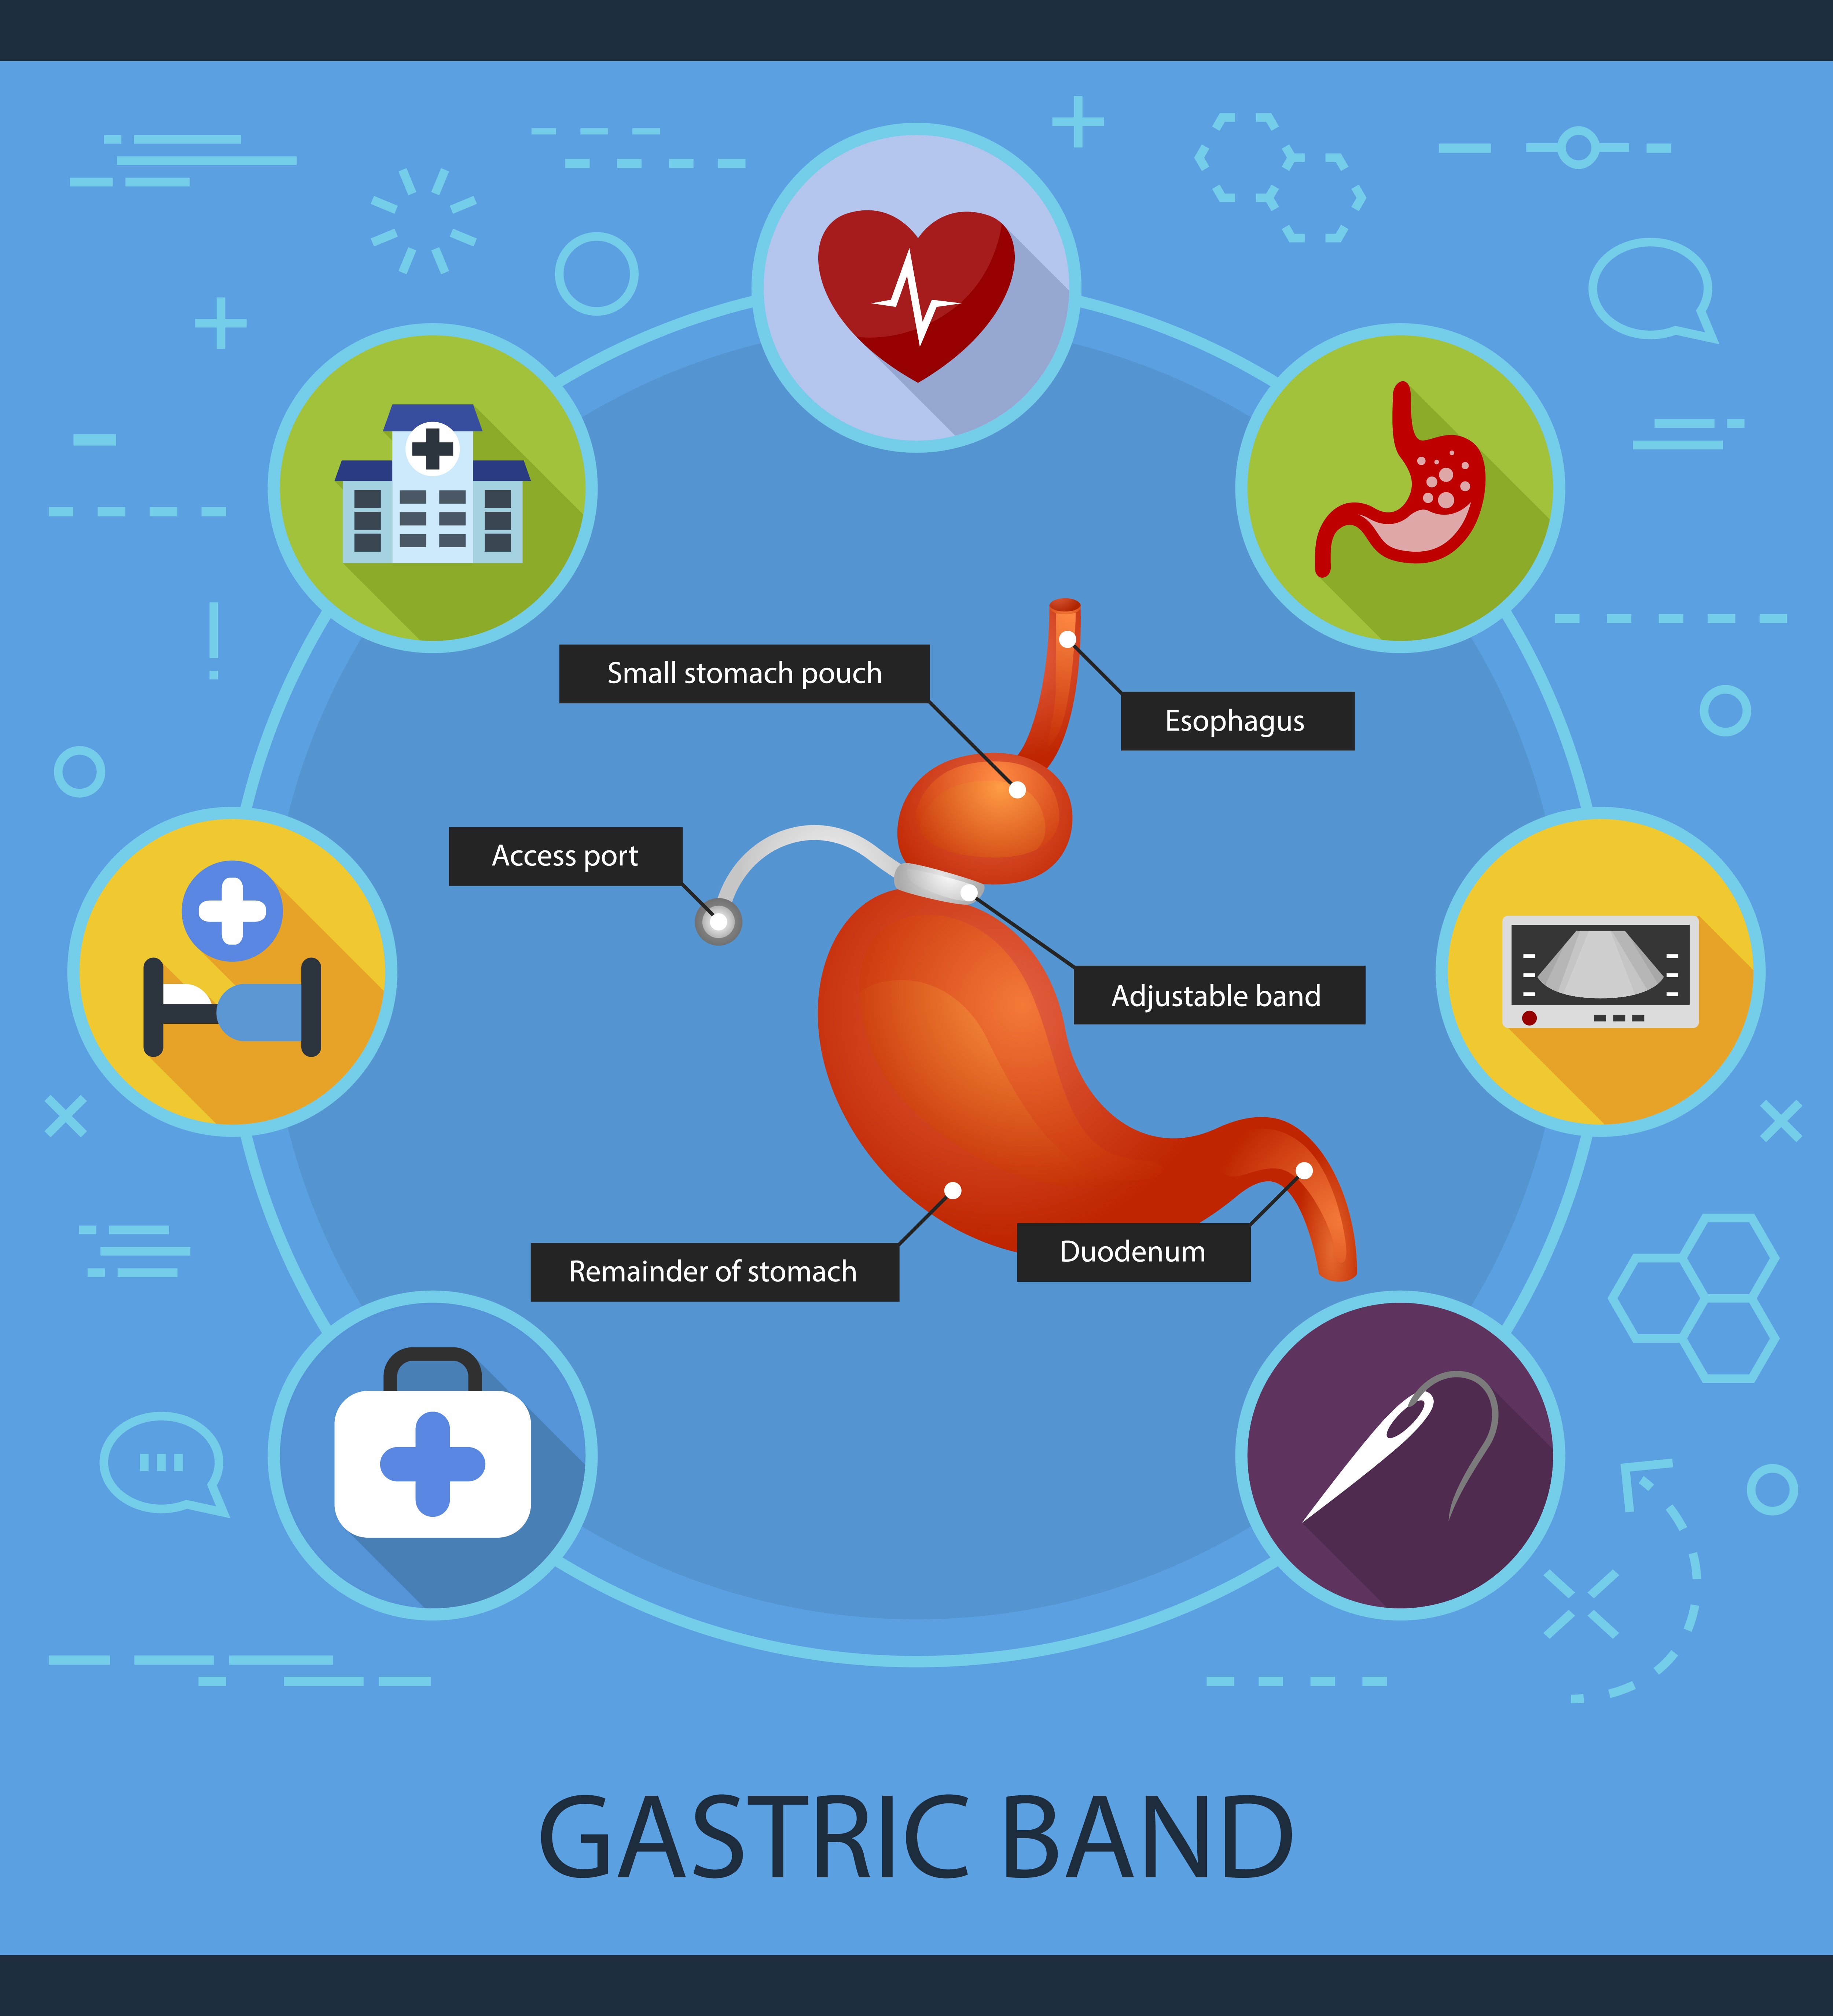 Gastric Sleeve or Lap Band Surgery - What is best for you?